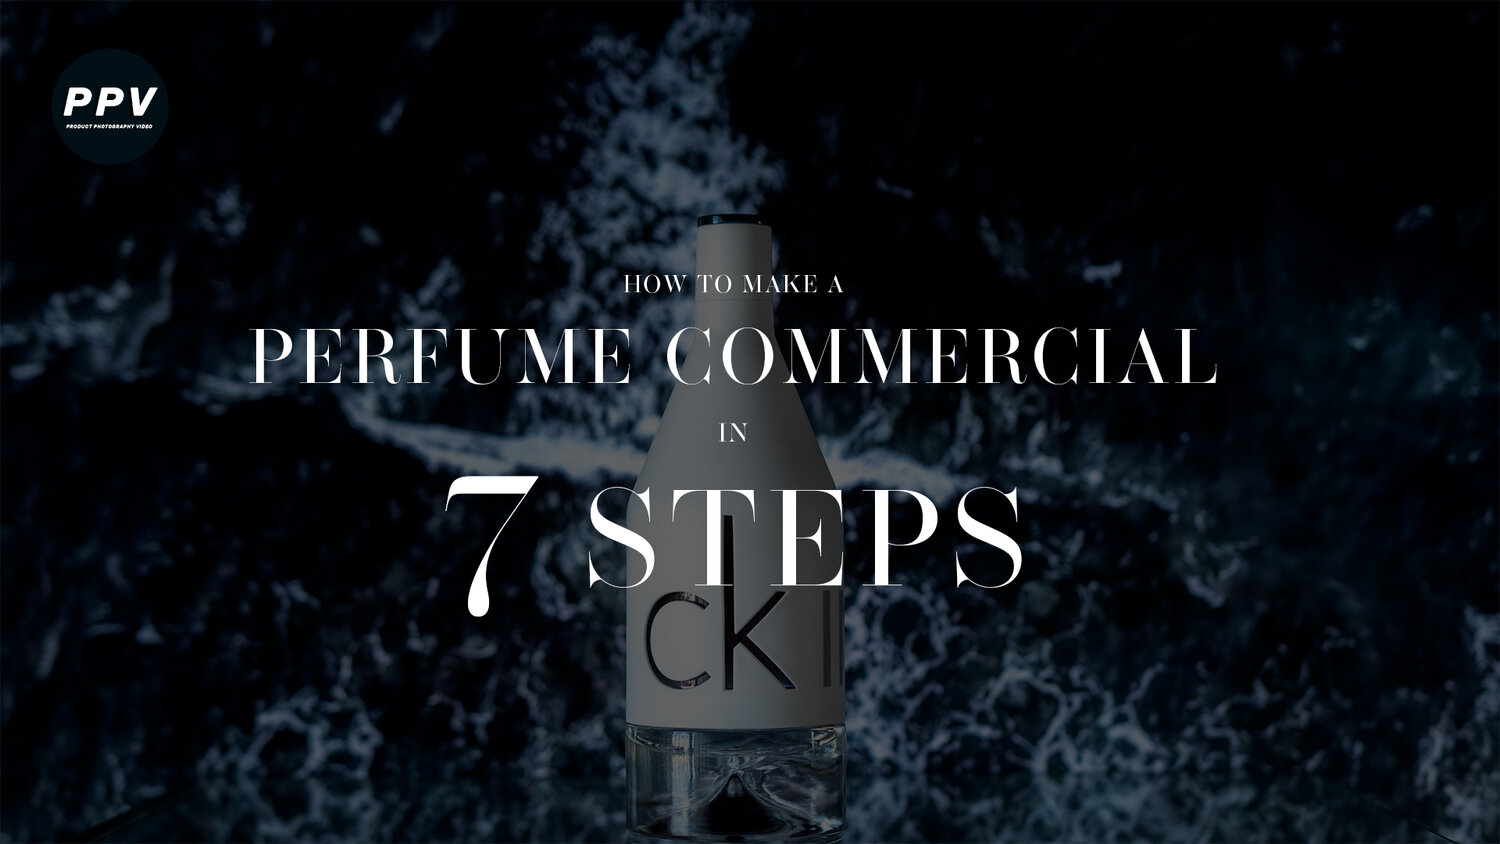 How to Make Perfume Commercial in 7 Steps — Product Video